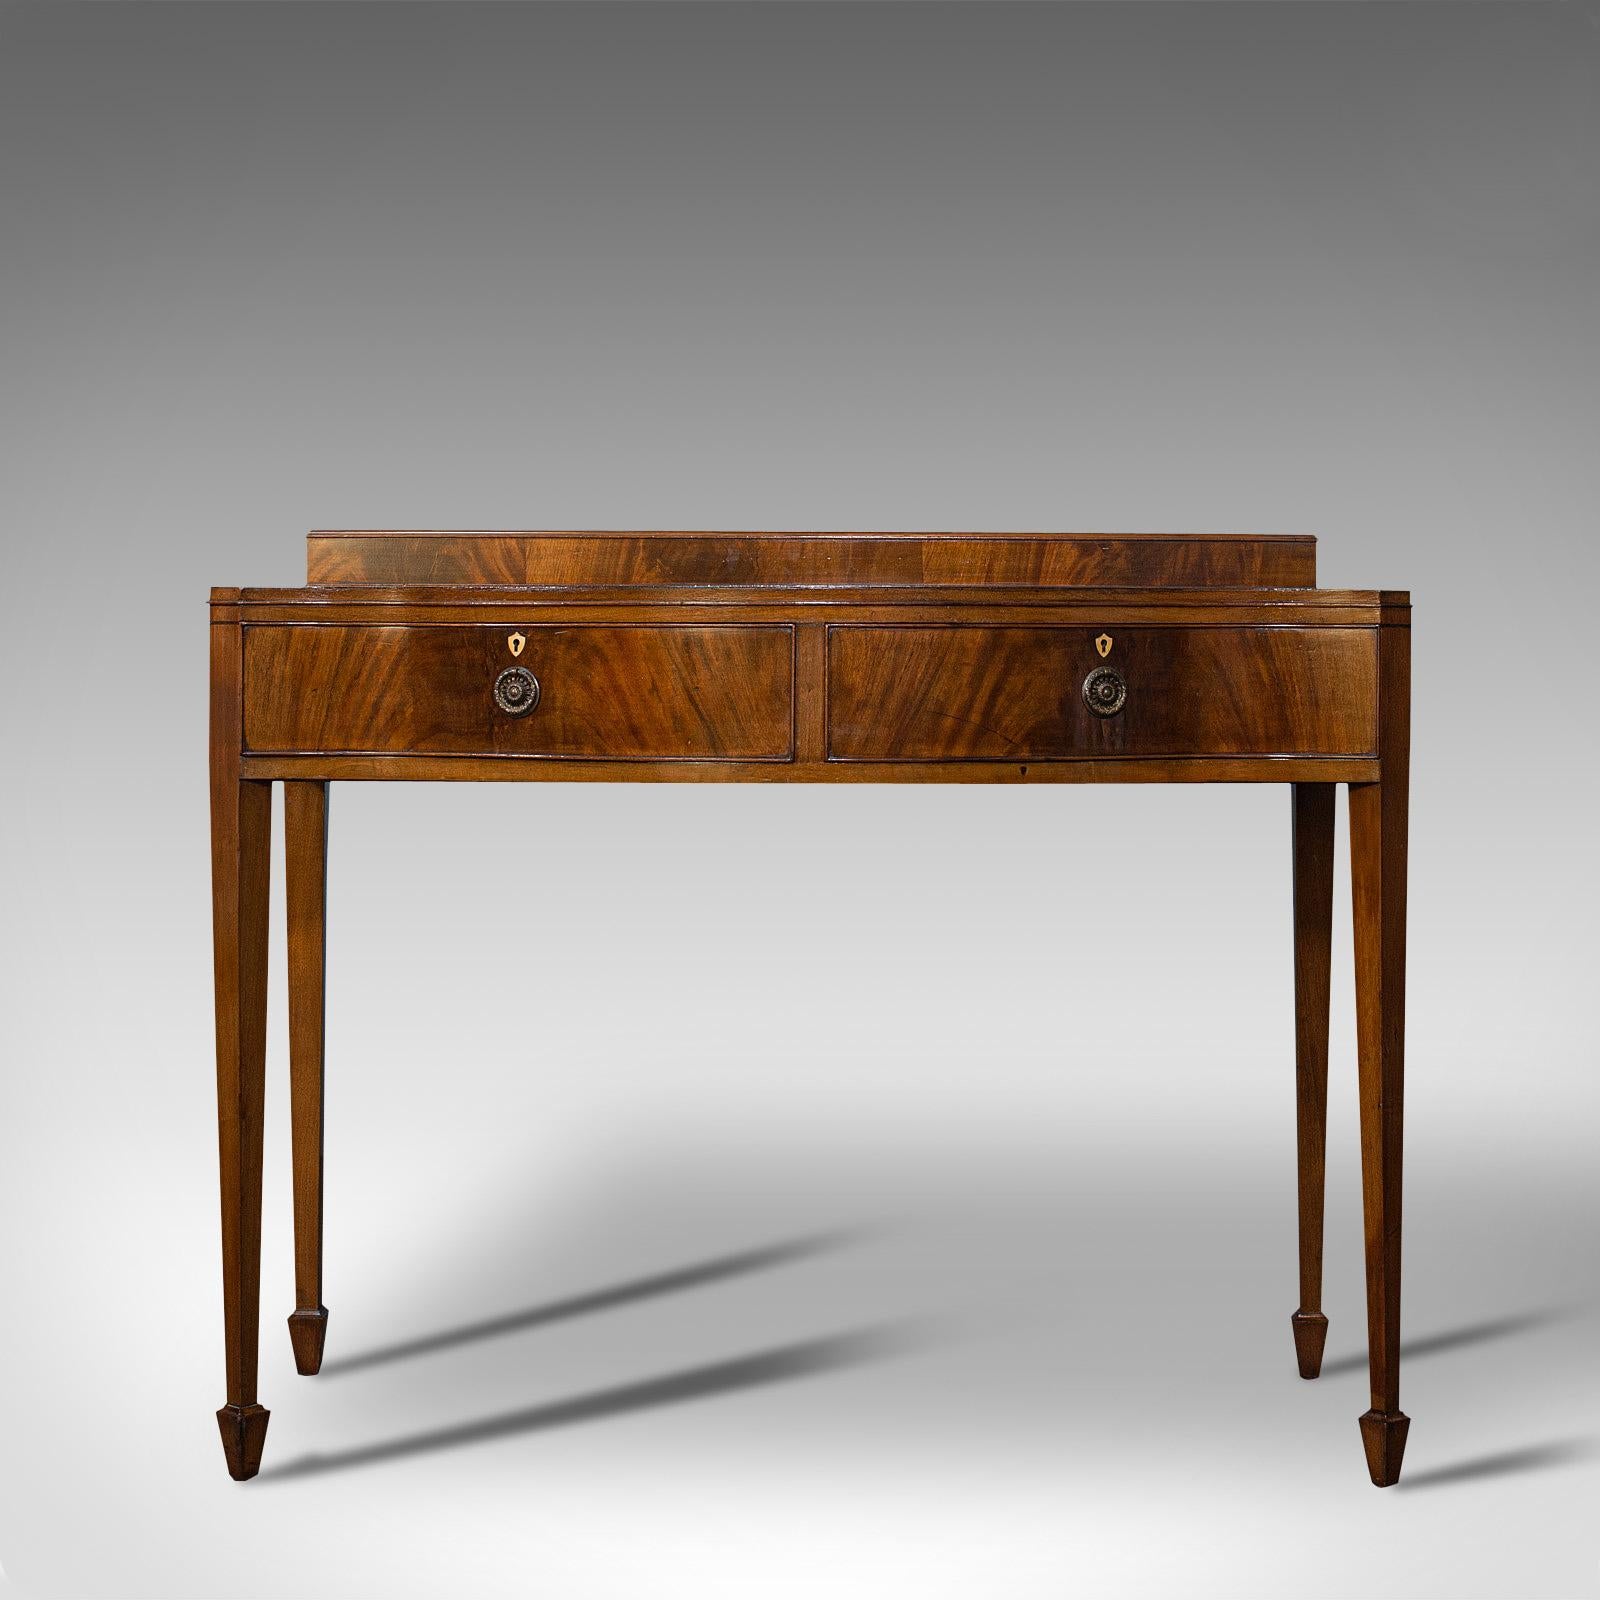 This is a superb antique side table. An English, mahogany buffet or server in the manner of Sheraton by Hamptons of London, dating to the Edwardian period, circa 1910.

Distinctive serpentine form with an abundance of quality
Displaying a